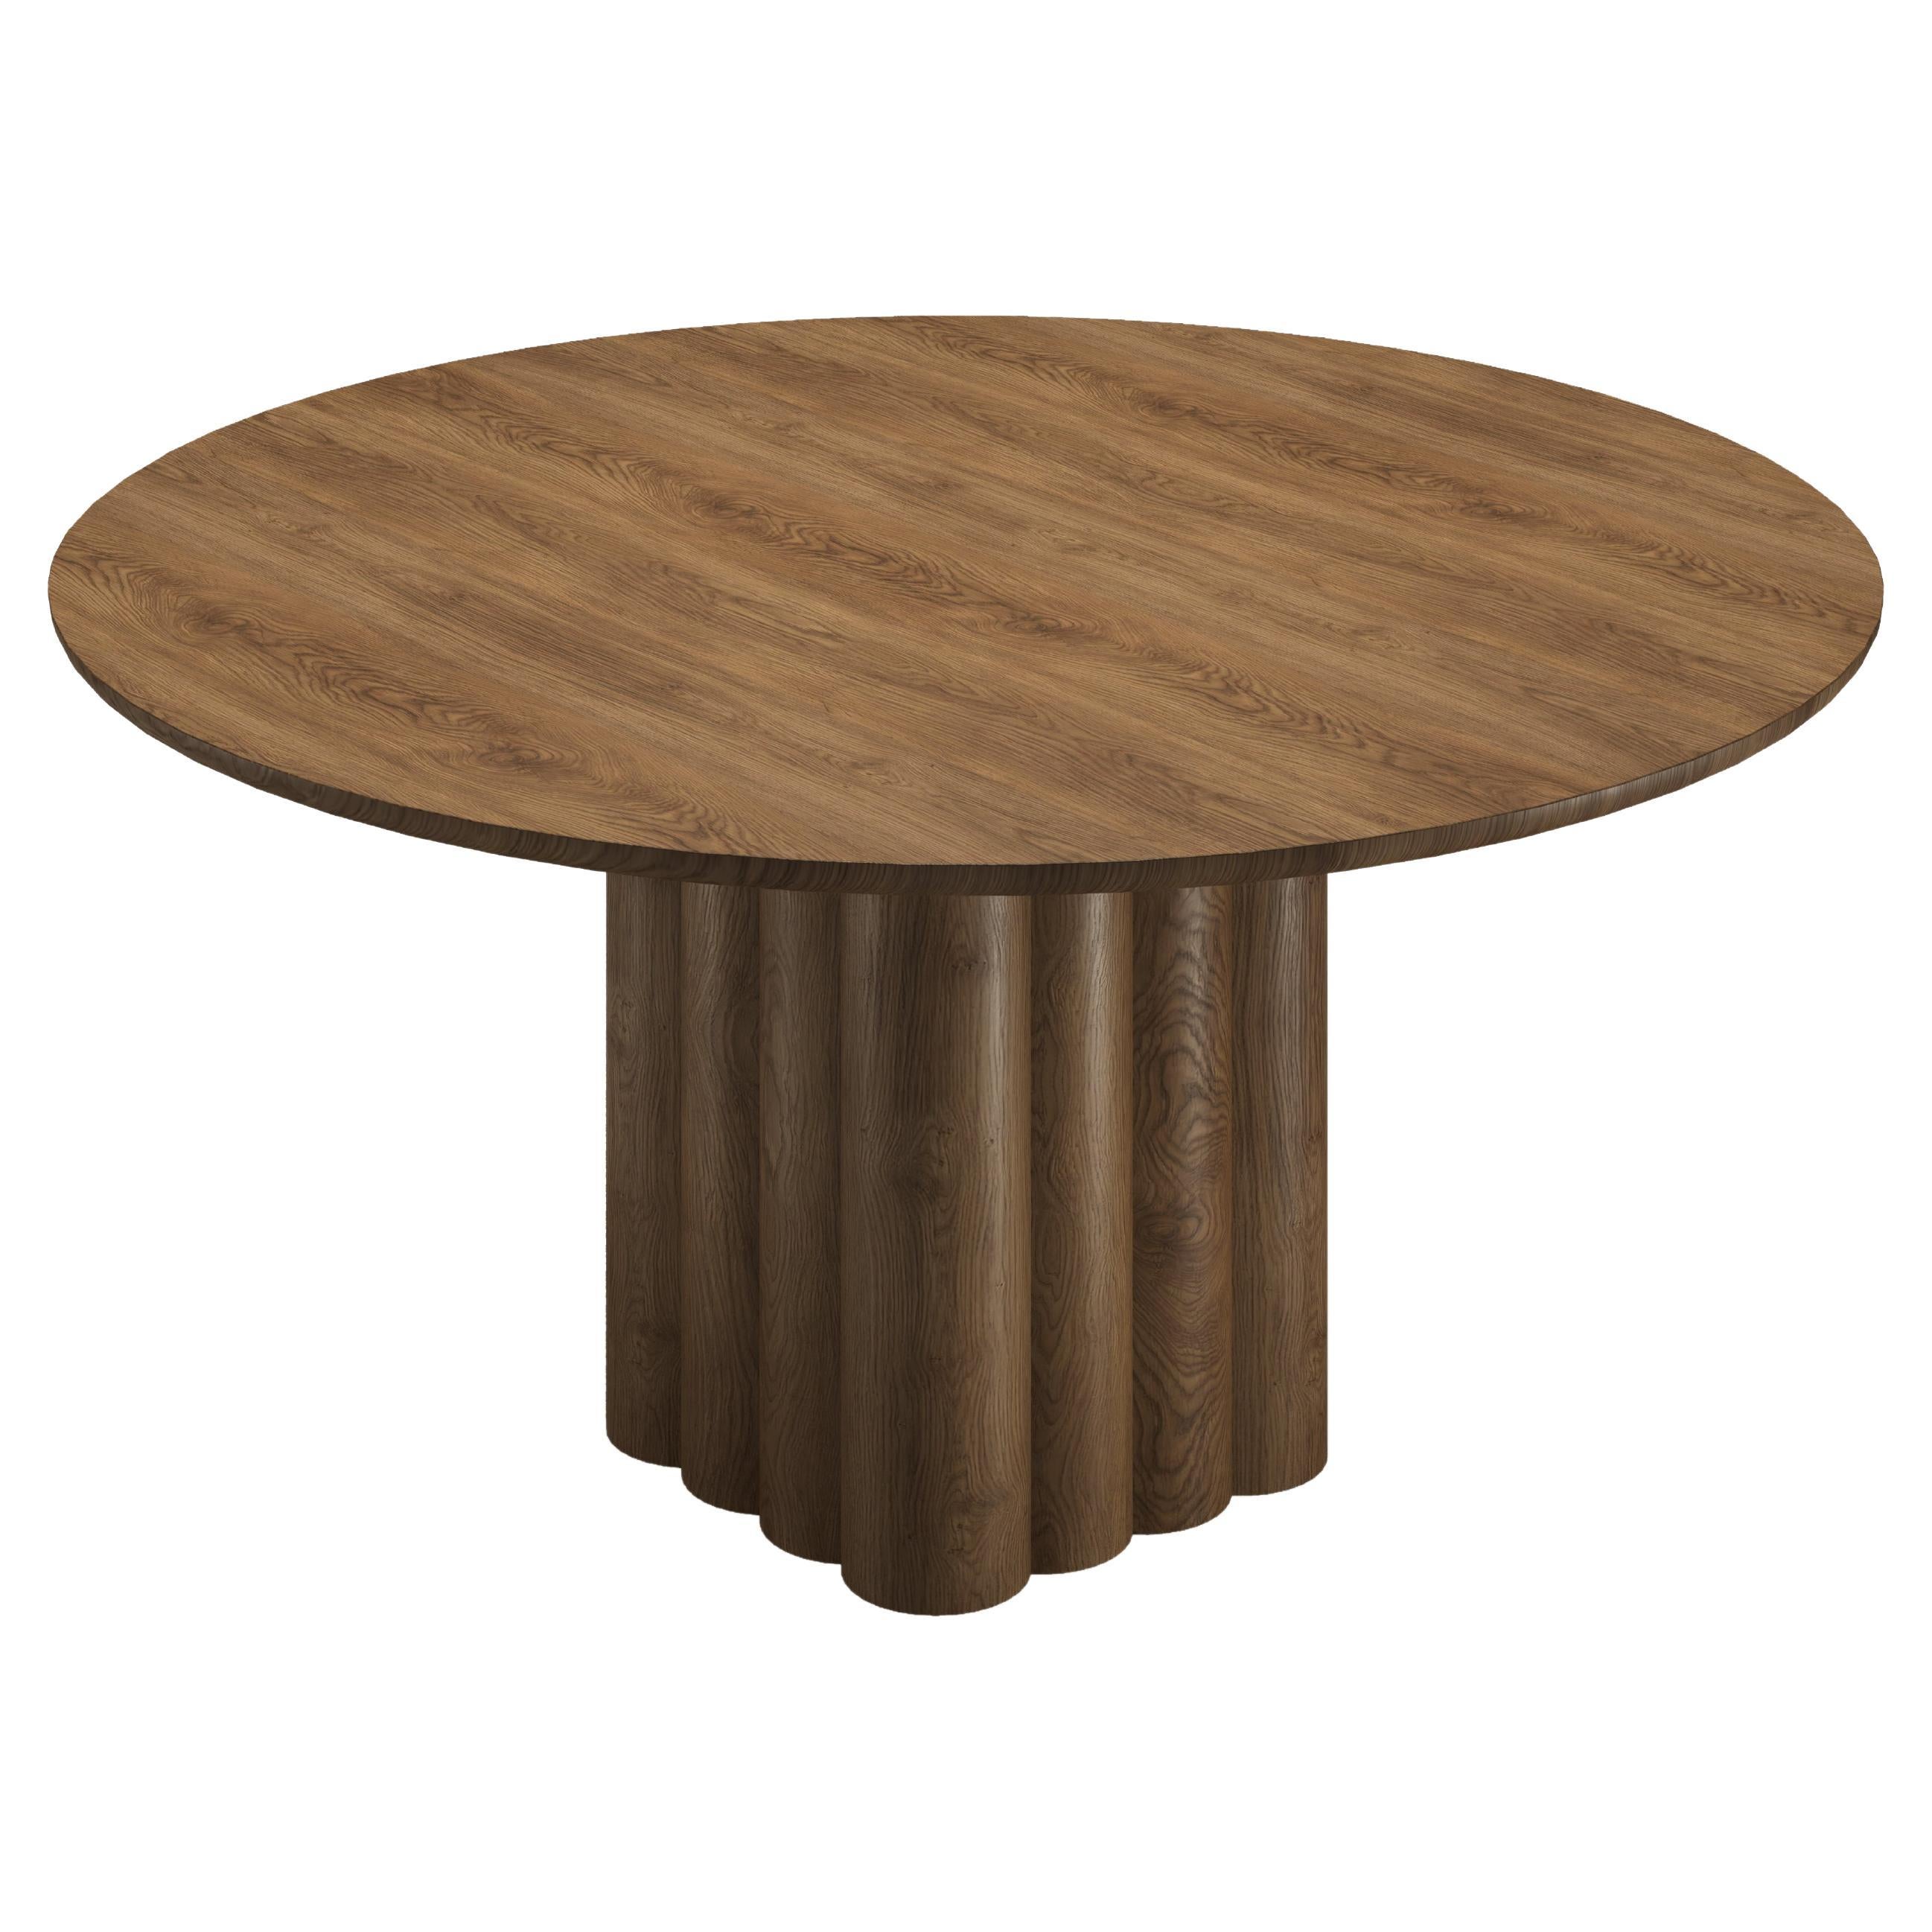 Round Dining Table 'Plush' by Dk3, Smoked Oak or Walnut, 140 cm For Sale